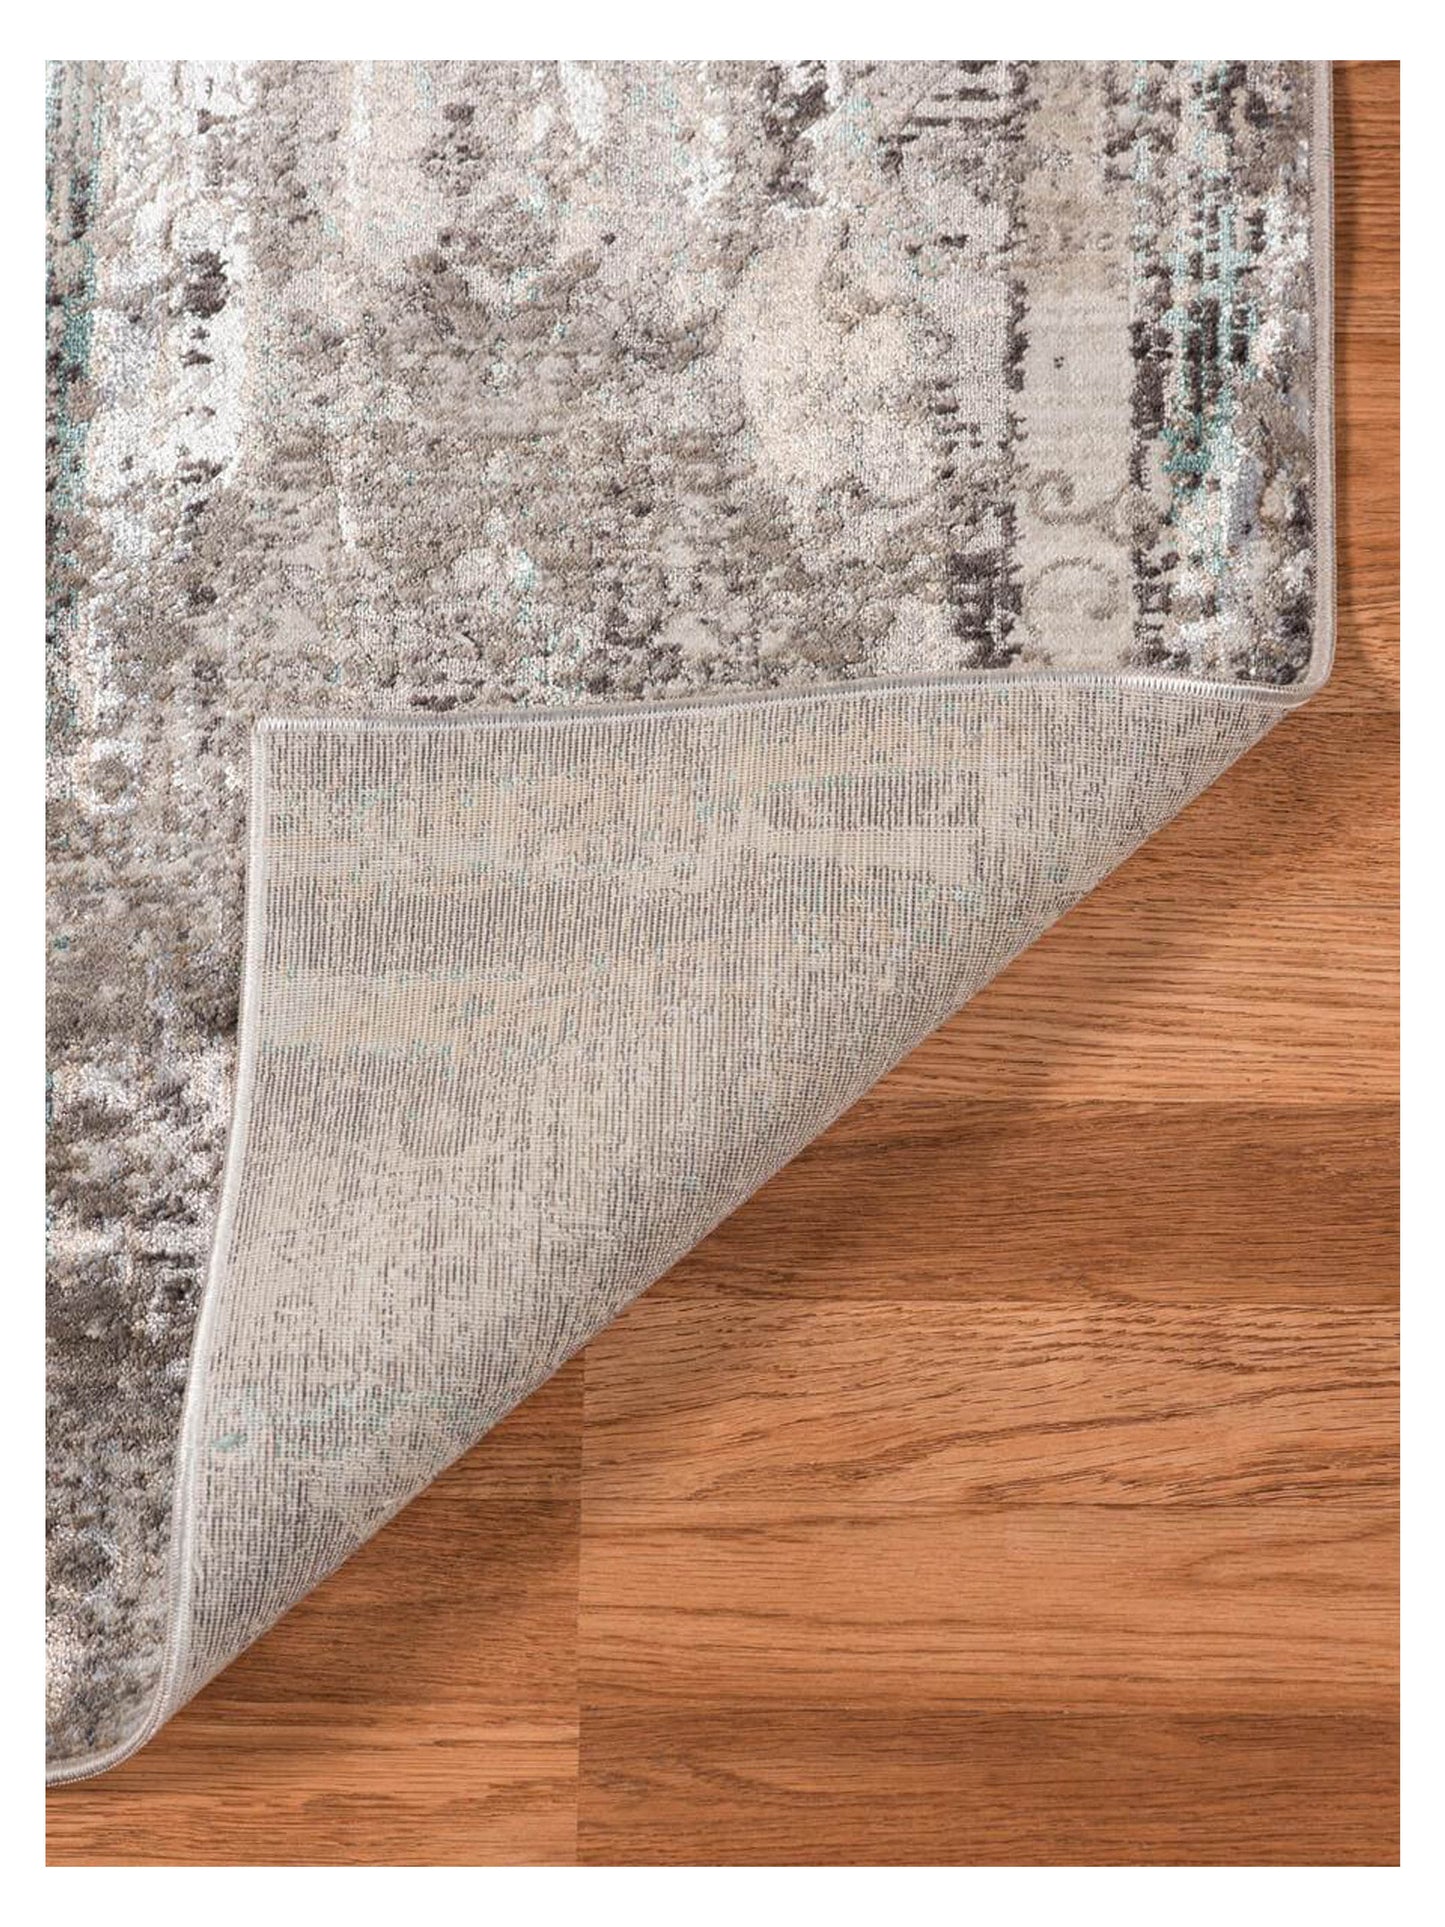 Limited Rosy RO-503 DOVE GRAY Transitional Machinemade Rug